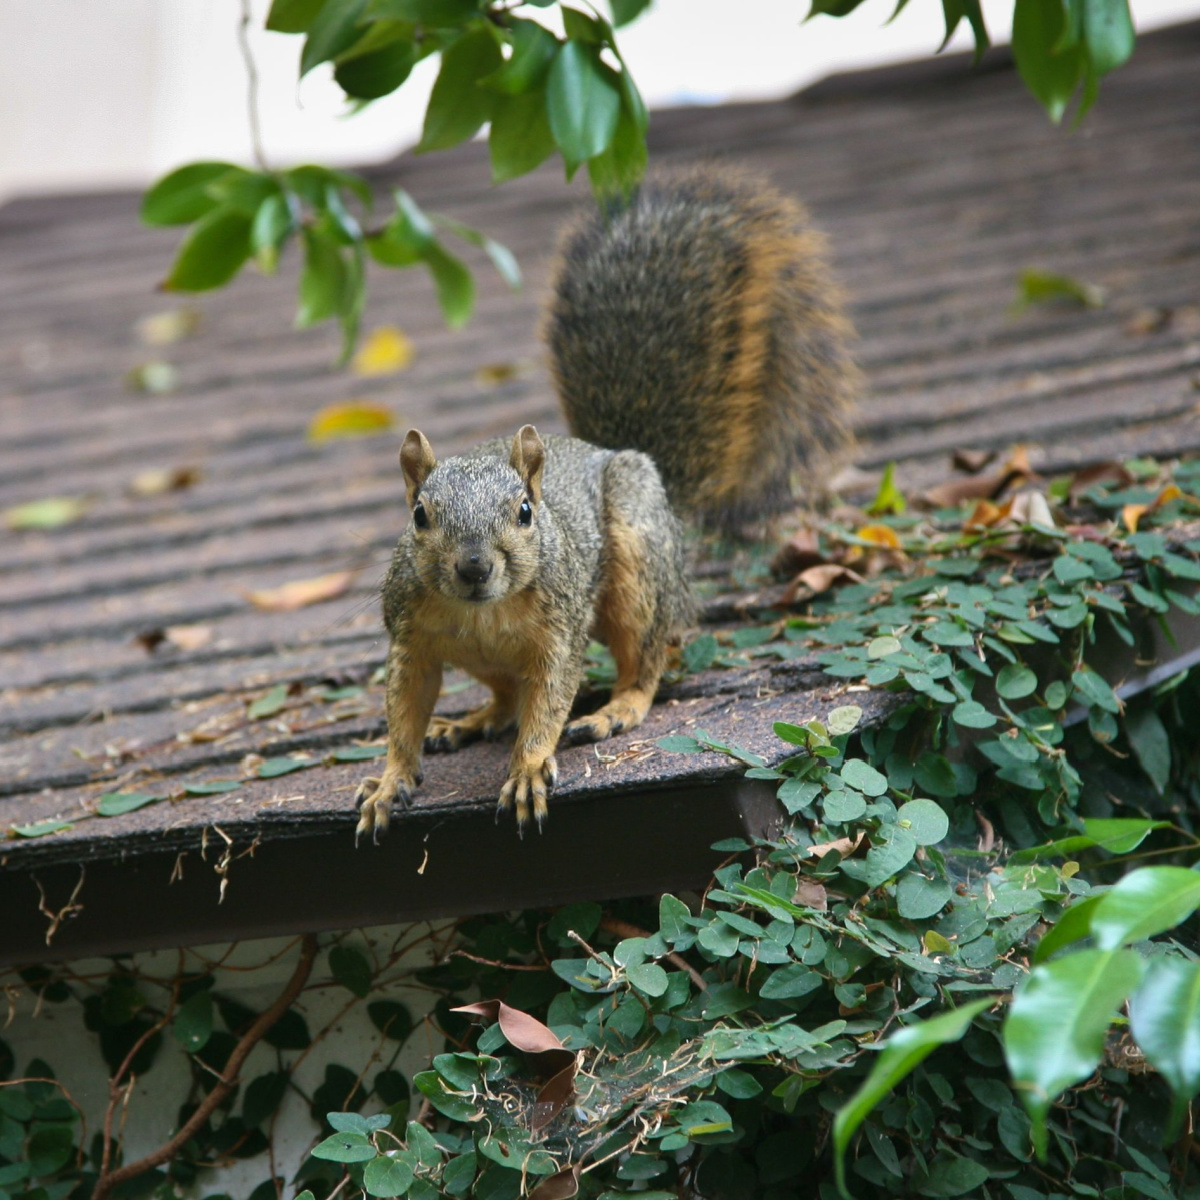 A squirrel on a roof